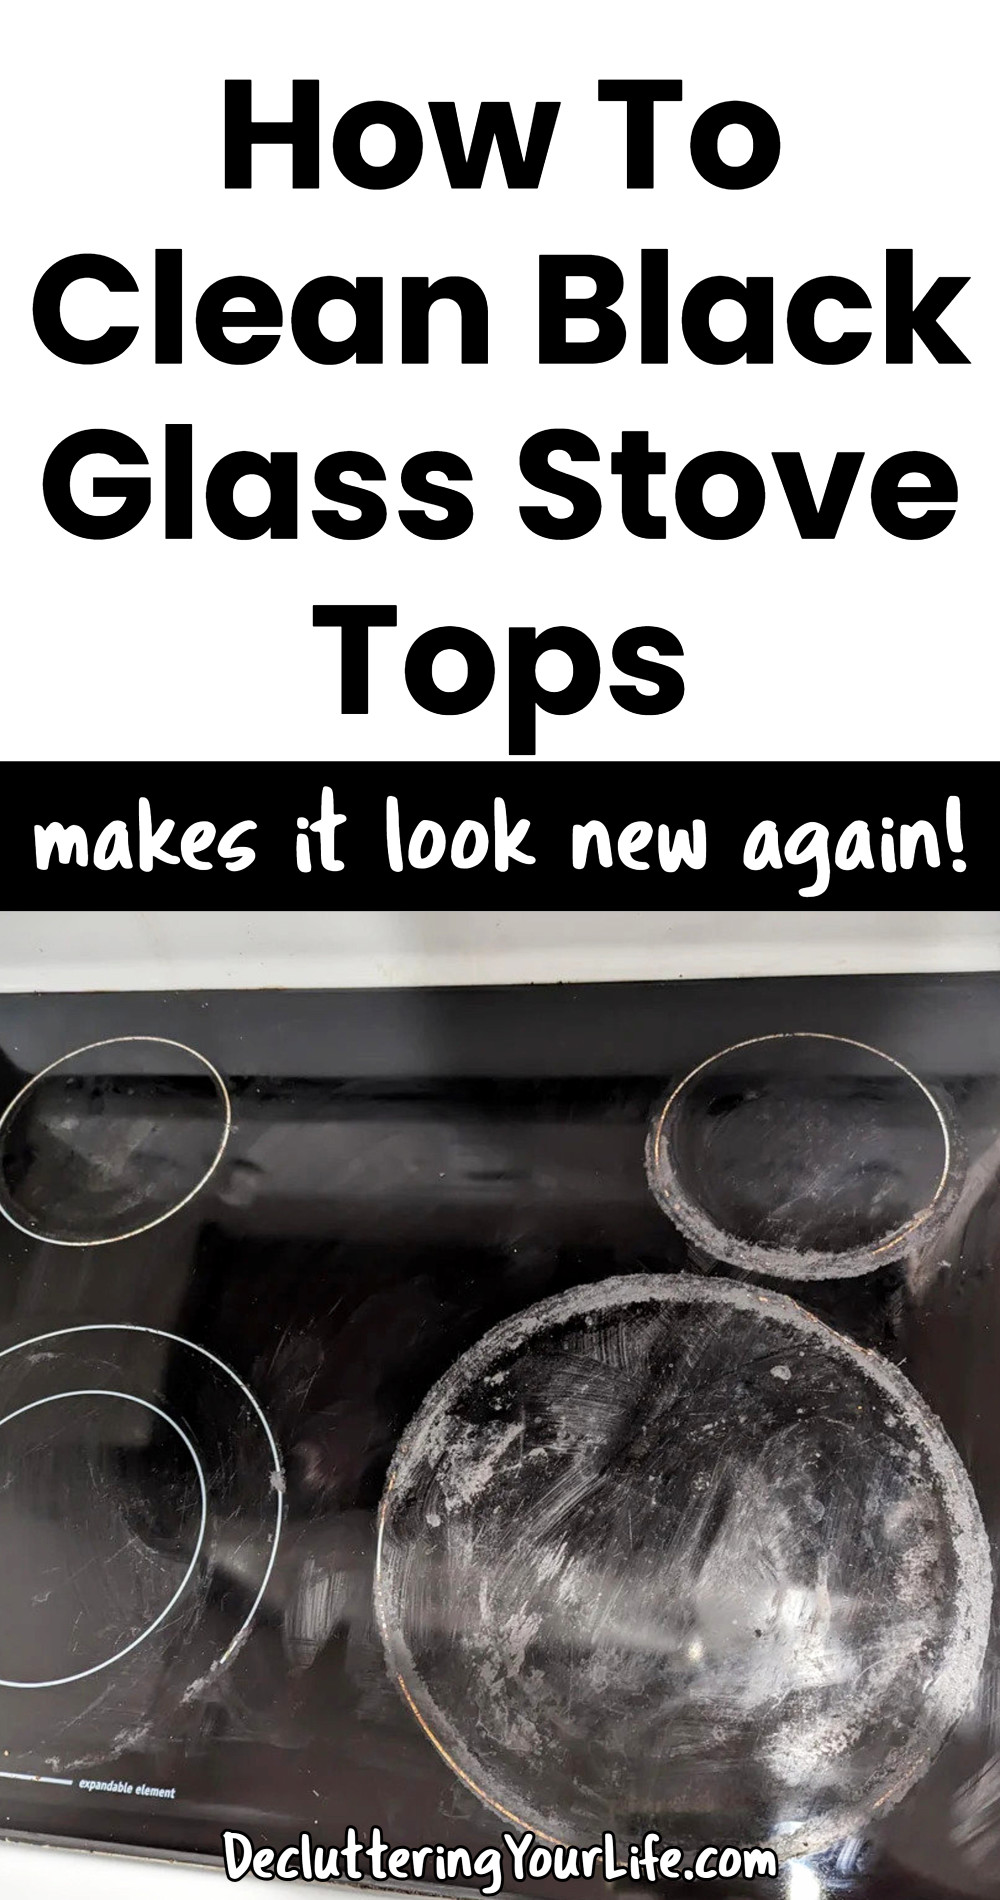 how to clean black glass stove tops